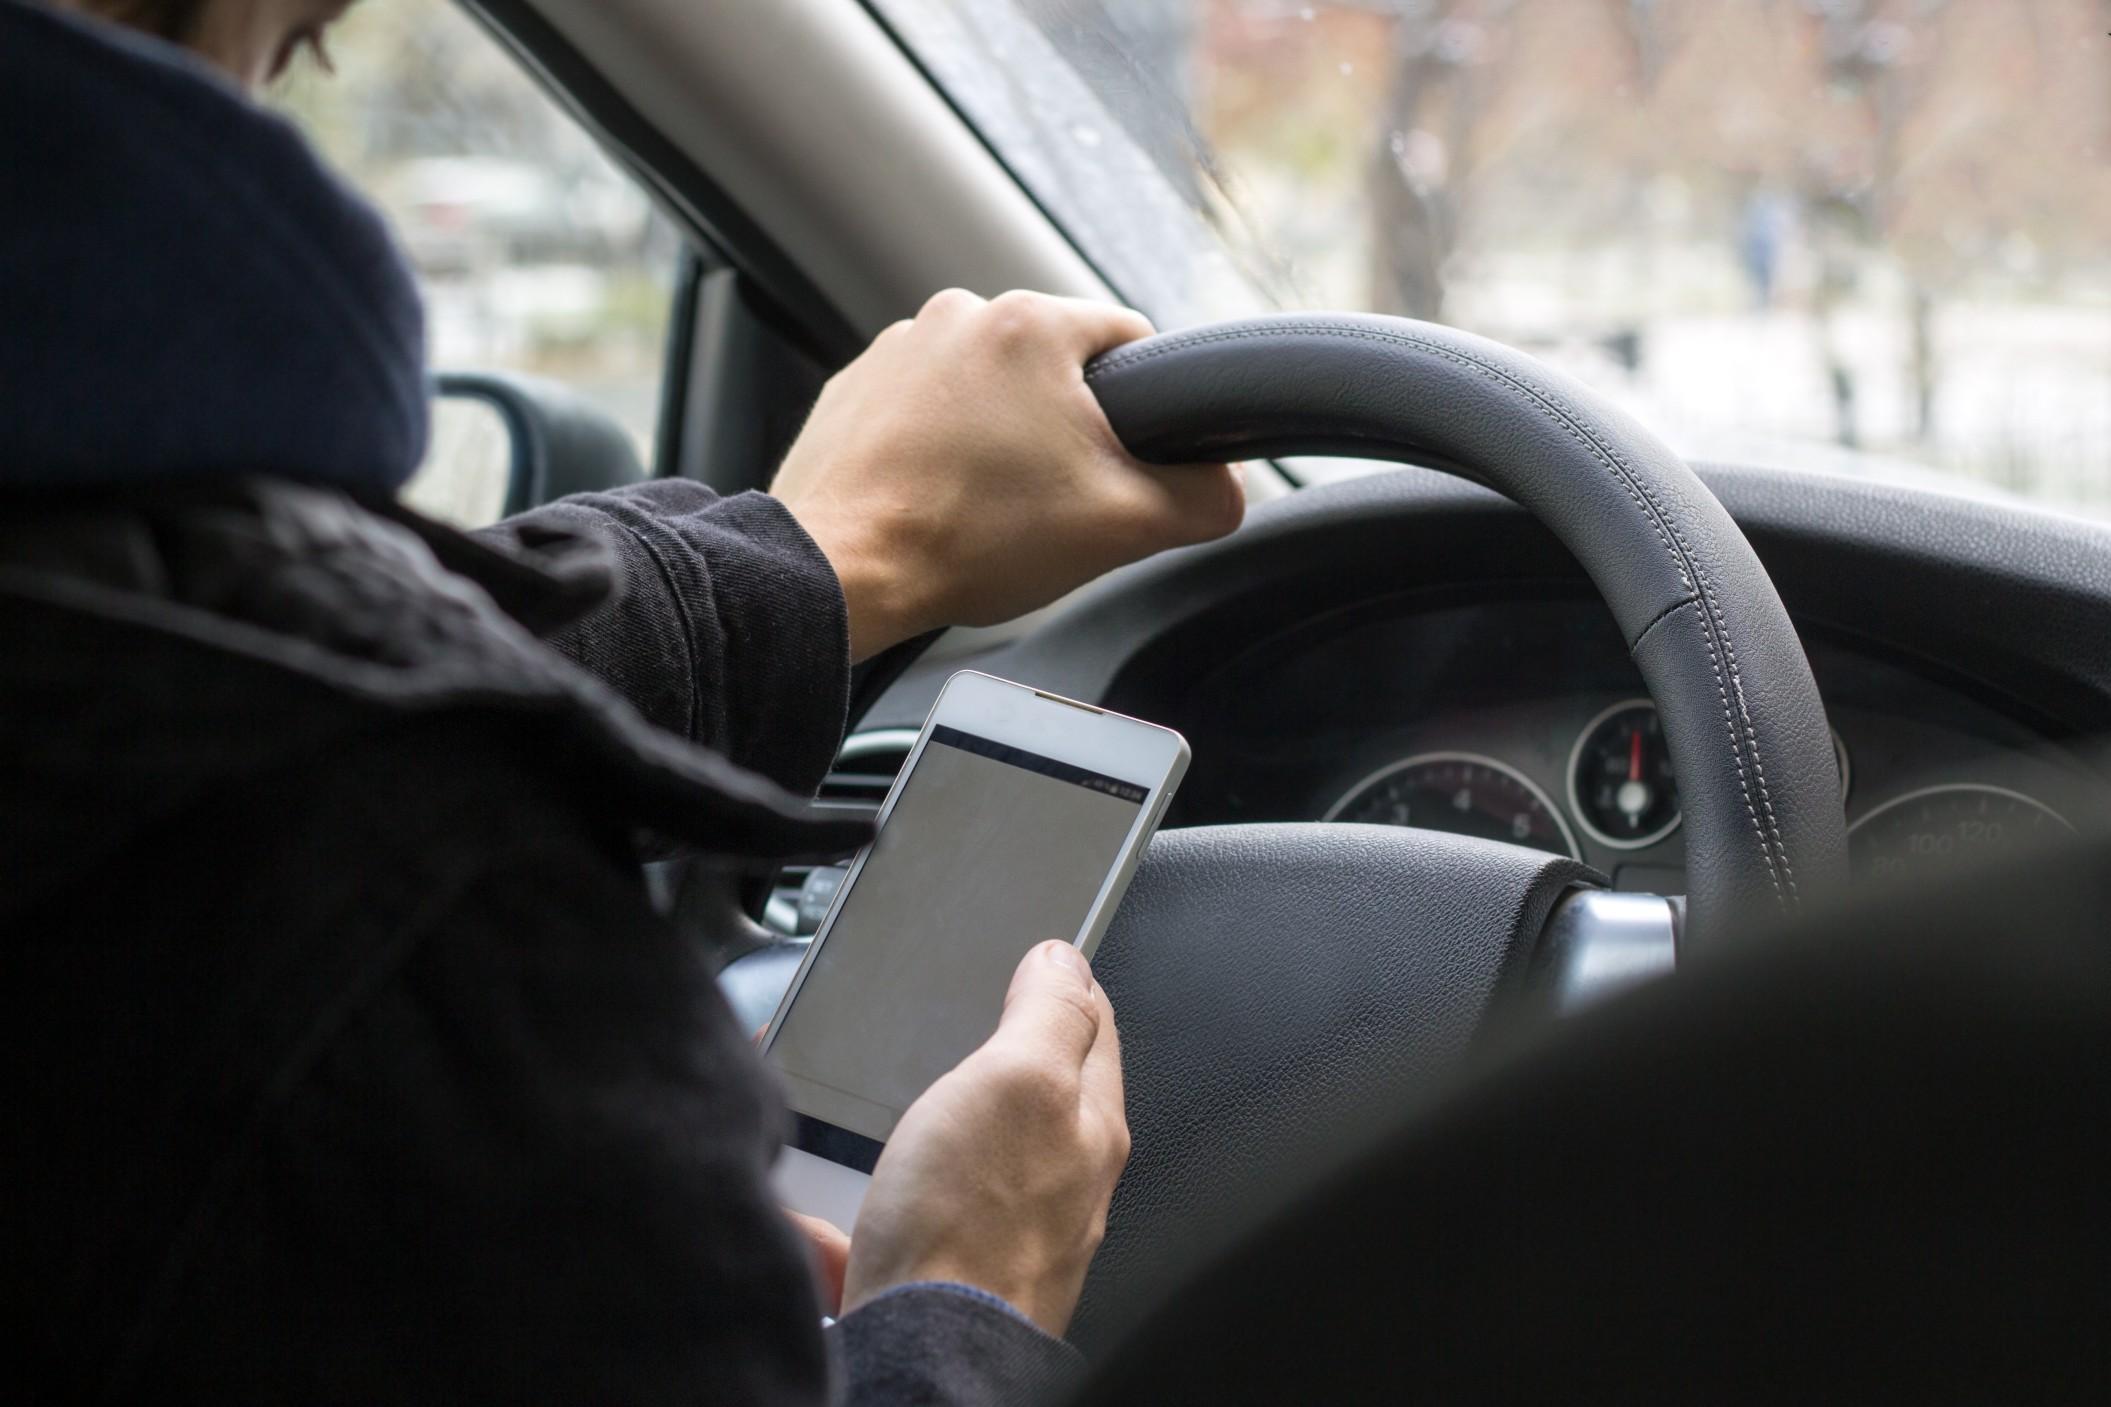 Road safety is an issue when people use technology while driving | Twenty20